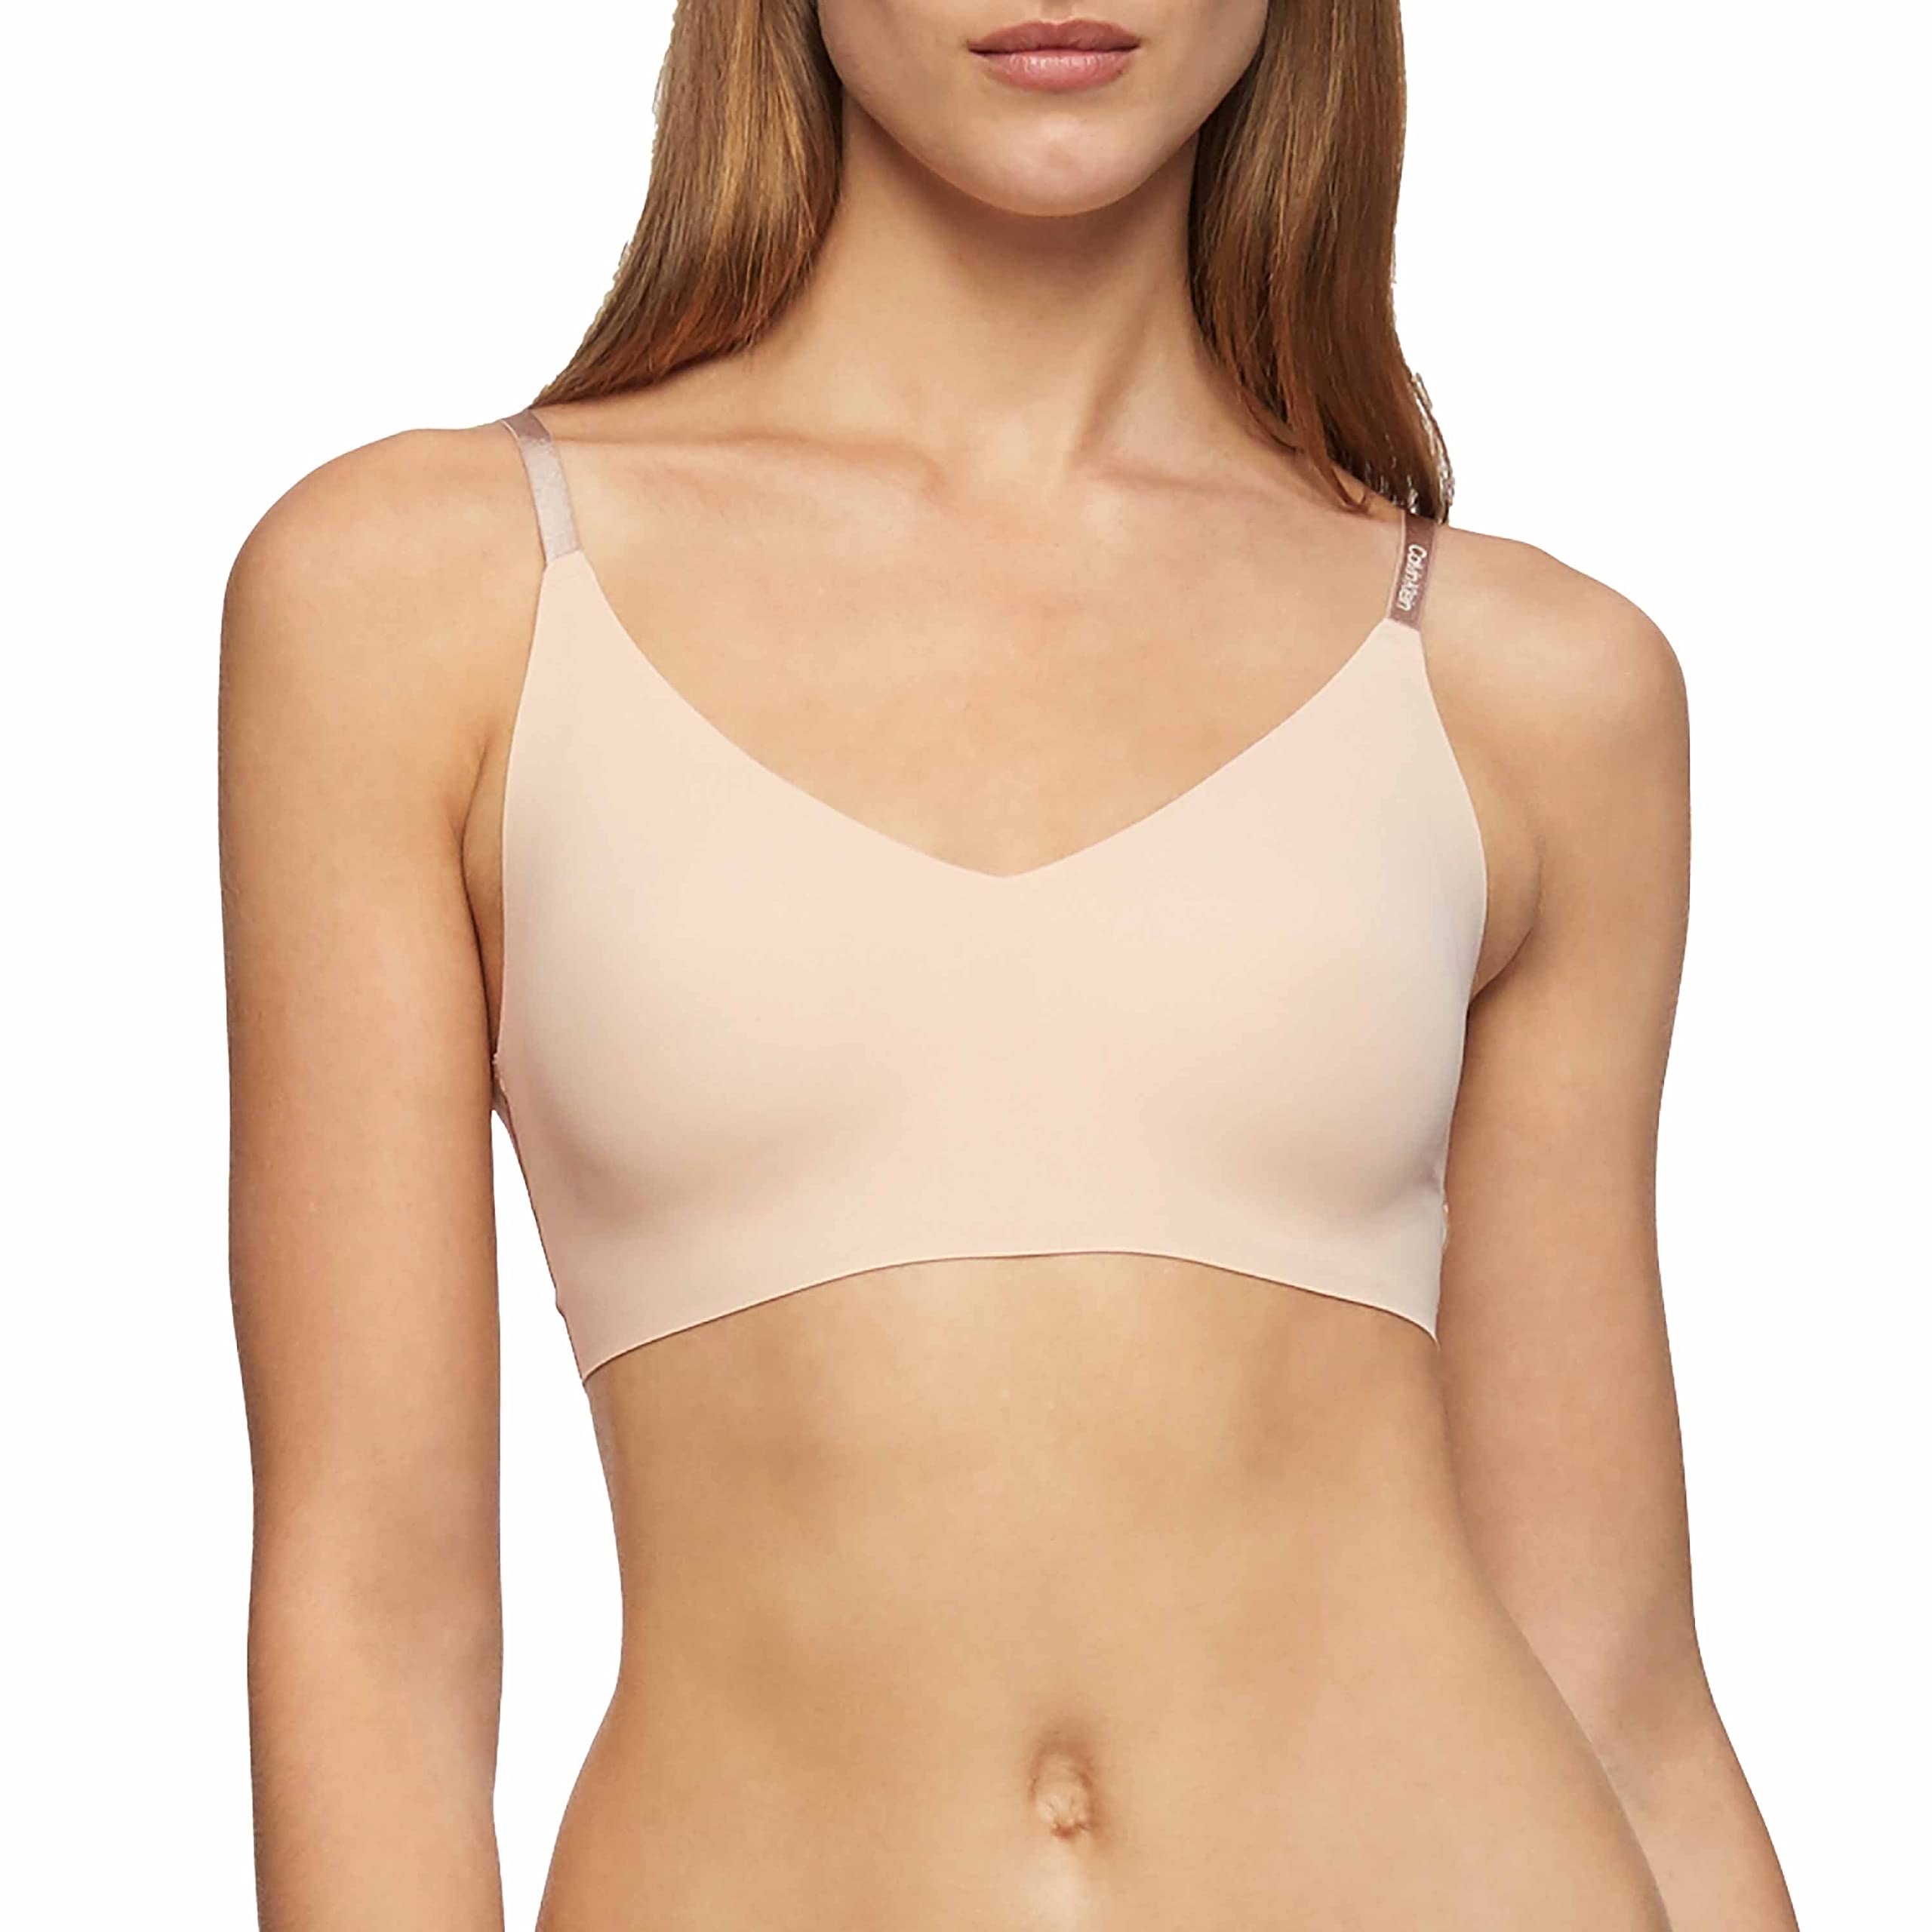 Calvin Klein Women's Invisibles Comfort Lightly Lined Seamless Wireless Triangle Bralette Bra